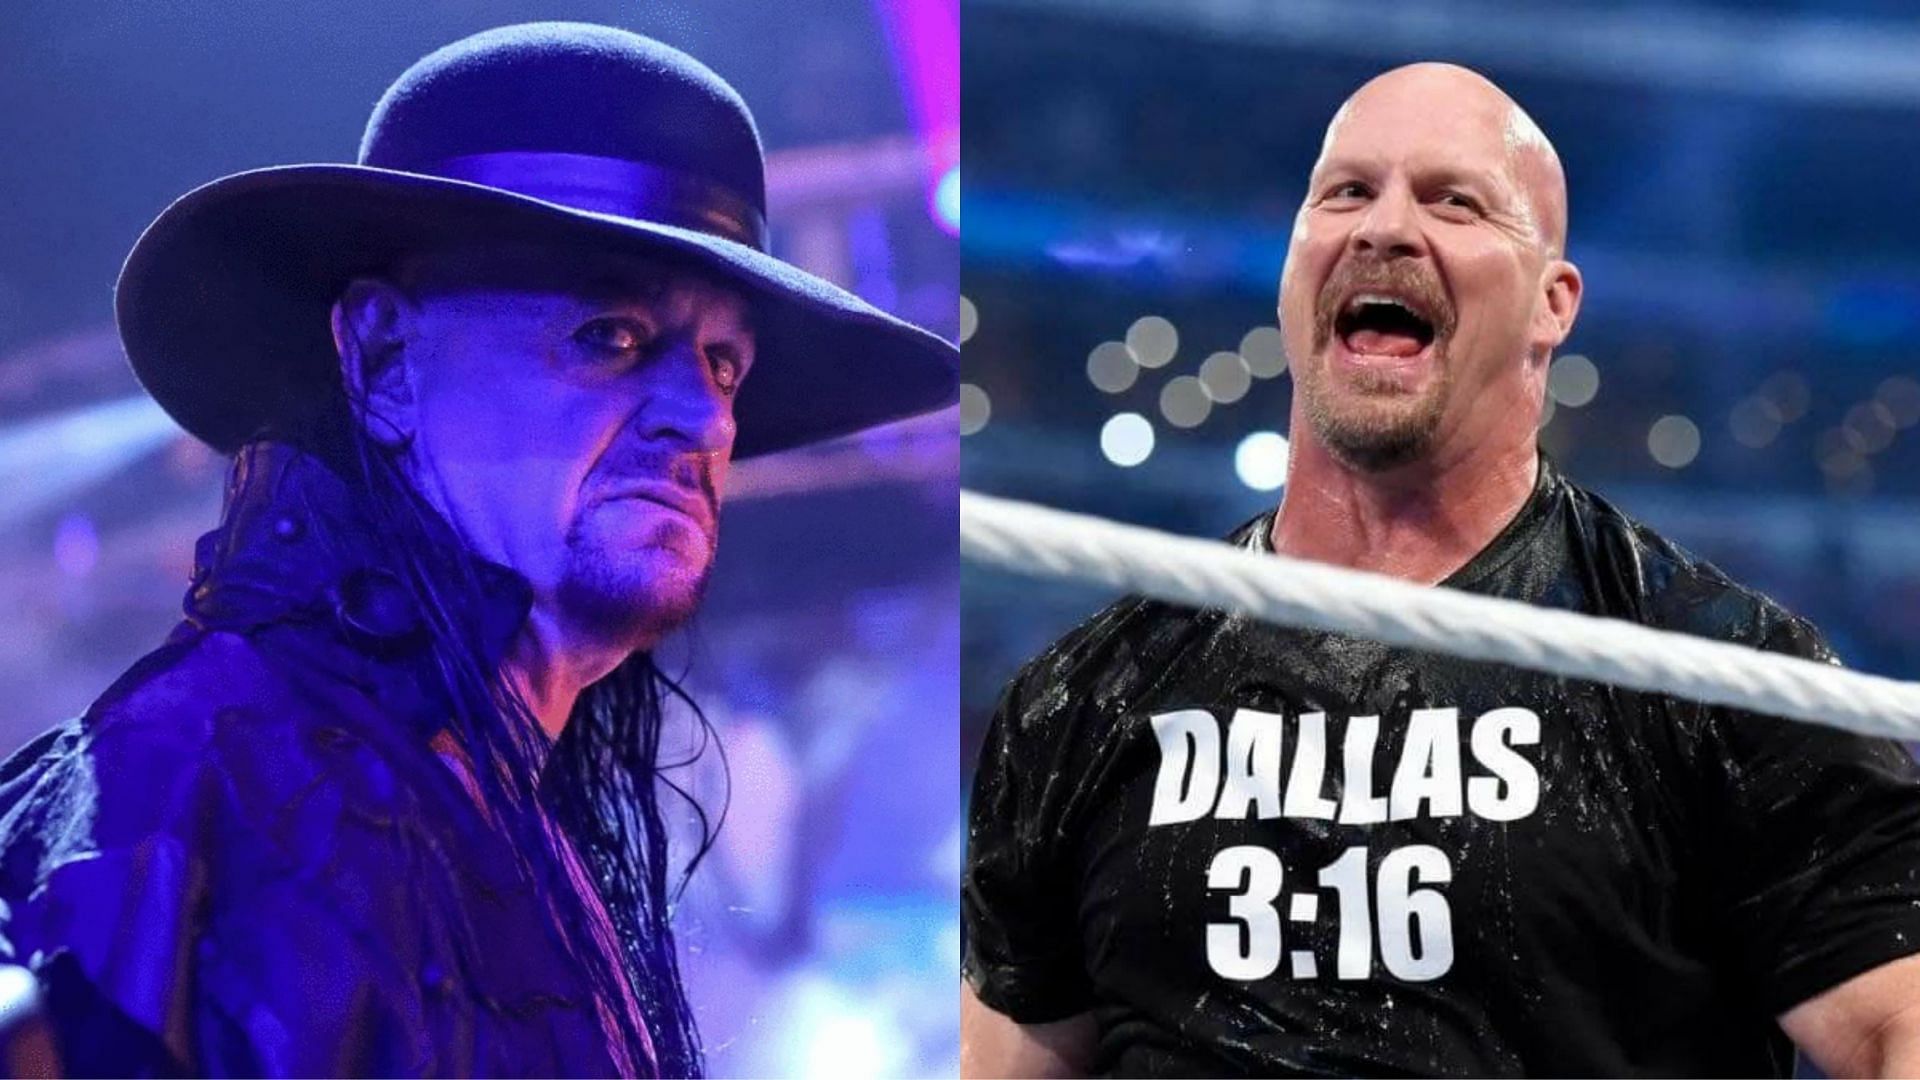 The Undertaker and Steve Austin are both icons of WWE